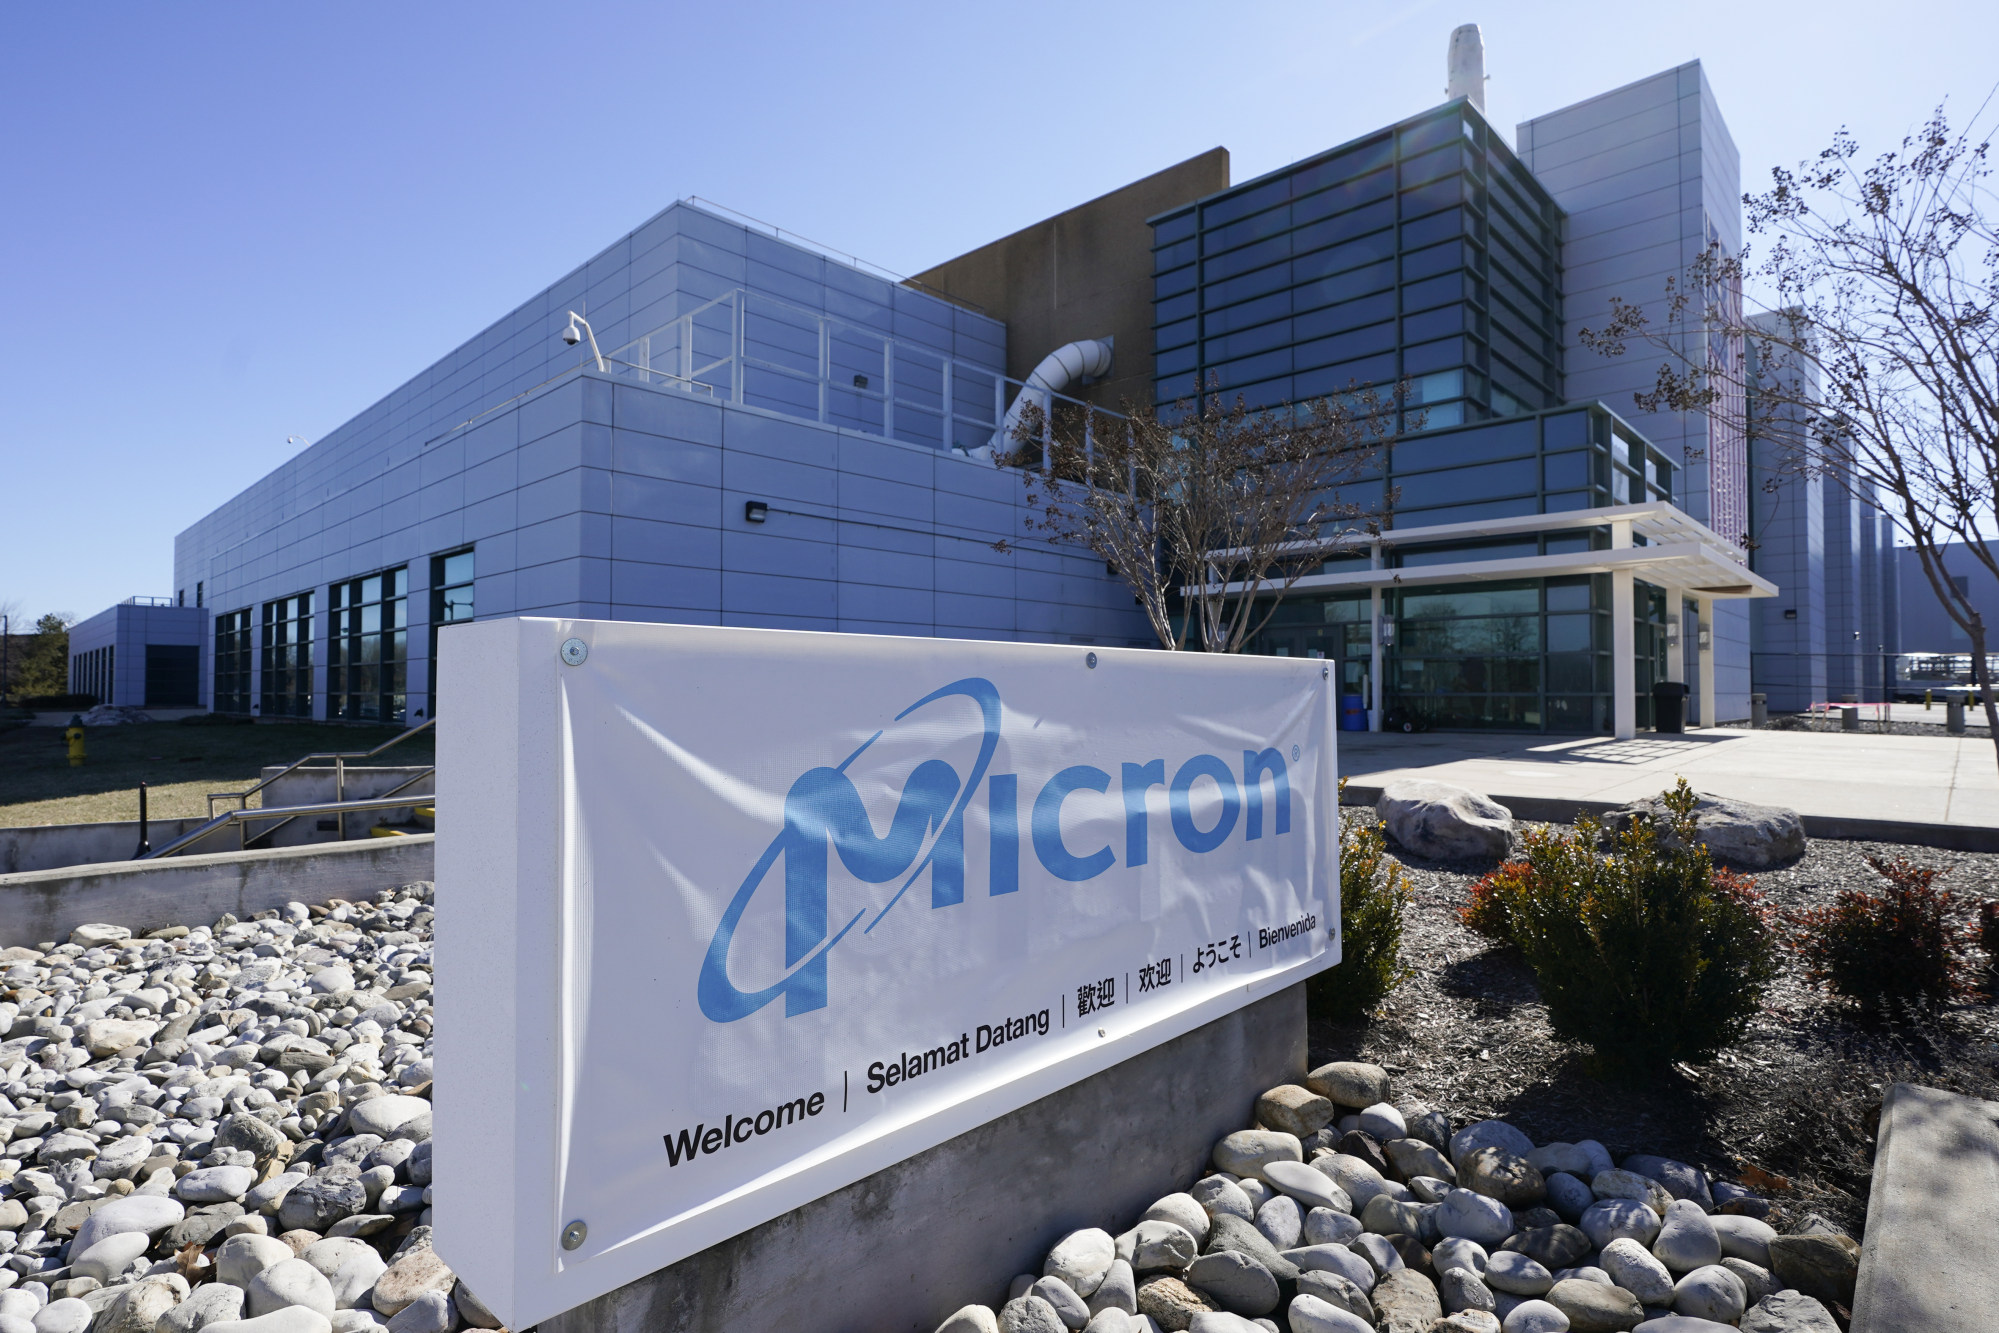 A Micron Technology automotive chip manufacturing plant in Virginia. Micron’s chief executive said that the company would invest US$15 billion though the end of the decade on a new semiconductor plant and credited the new CHIPS and Science law for making it possible. Photo: AP